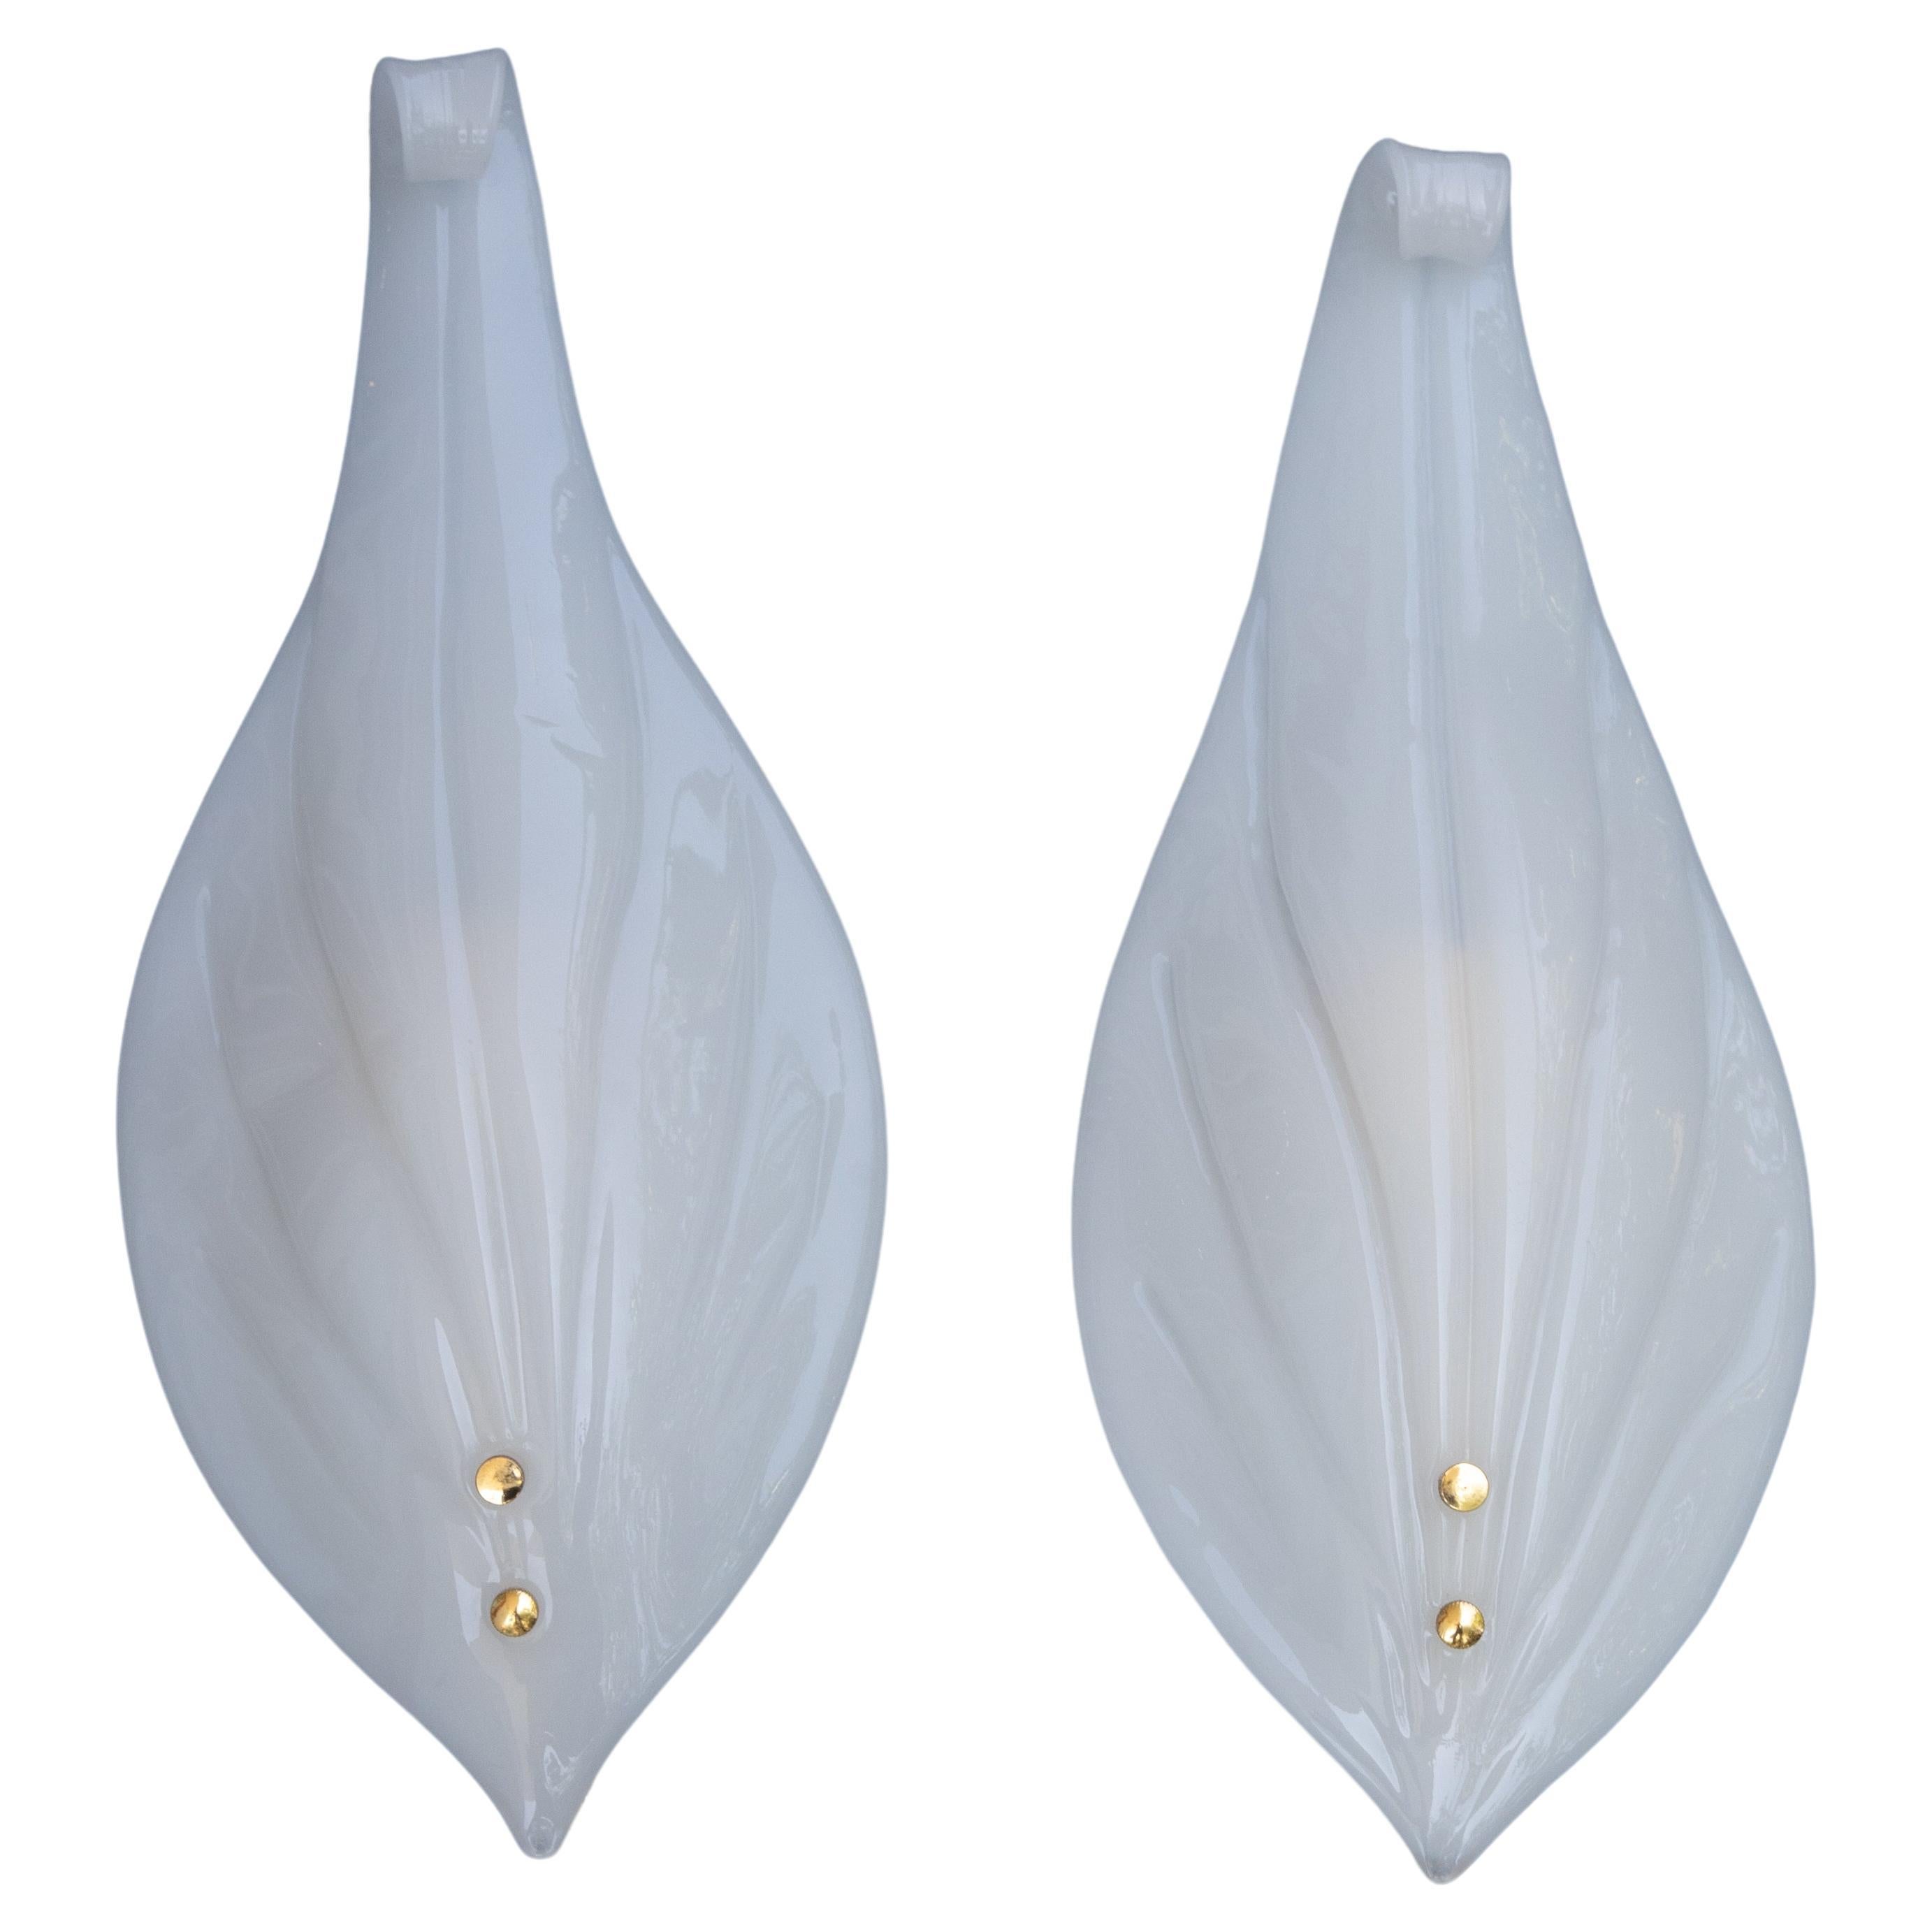 Pair of Vintage Italian Murano Glass Wall Sconces, White, 1970